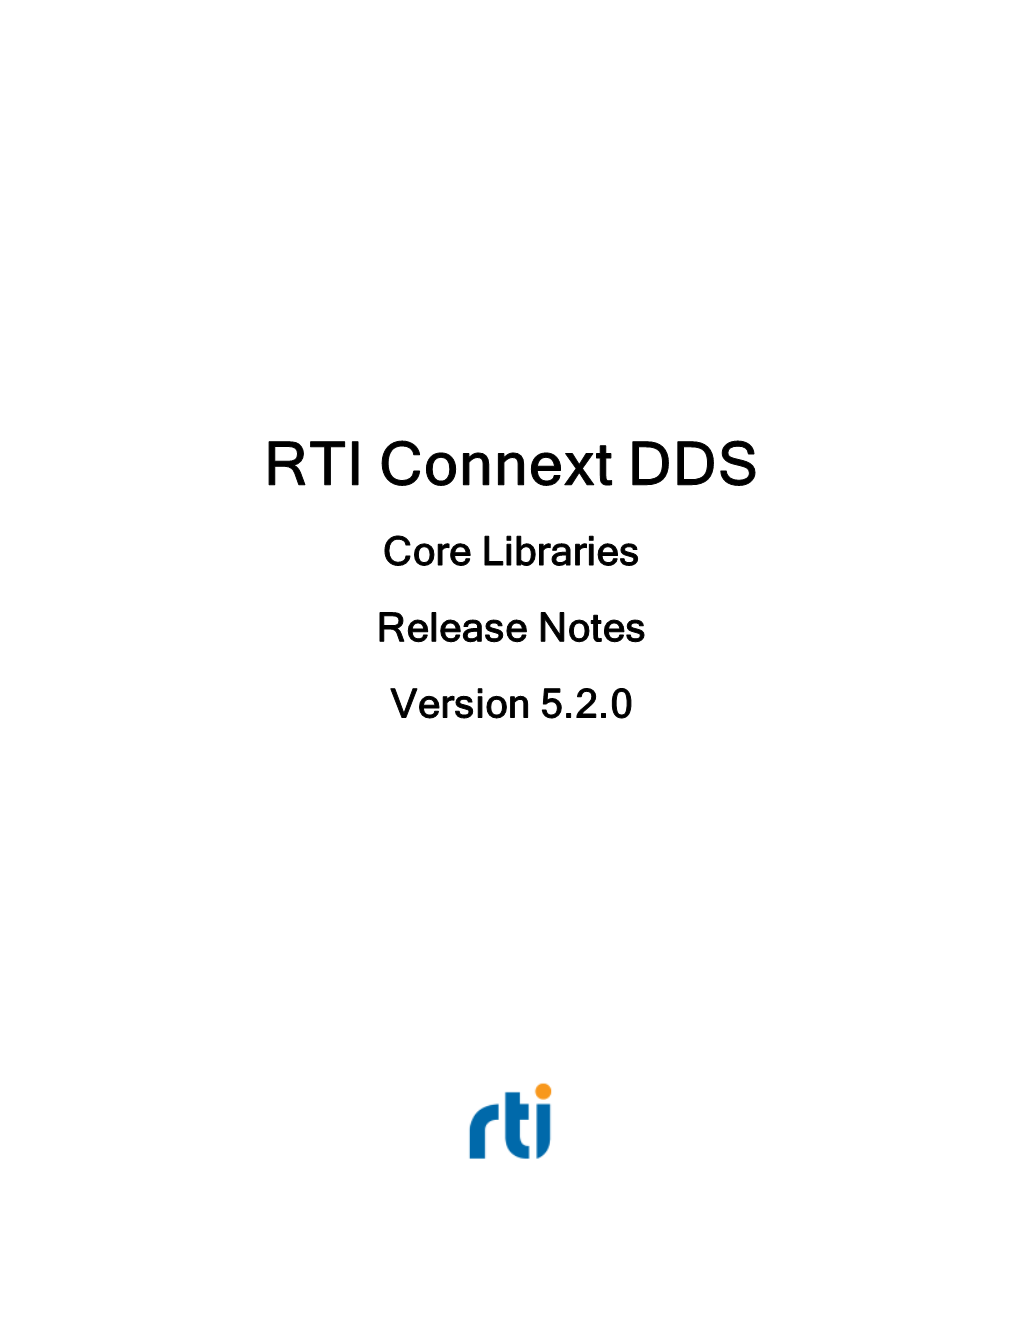 RTI Connext DDS Core Libraries Release Notes Version 5.2.0 © 2015 Real-Time Innovations, Inc